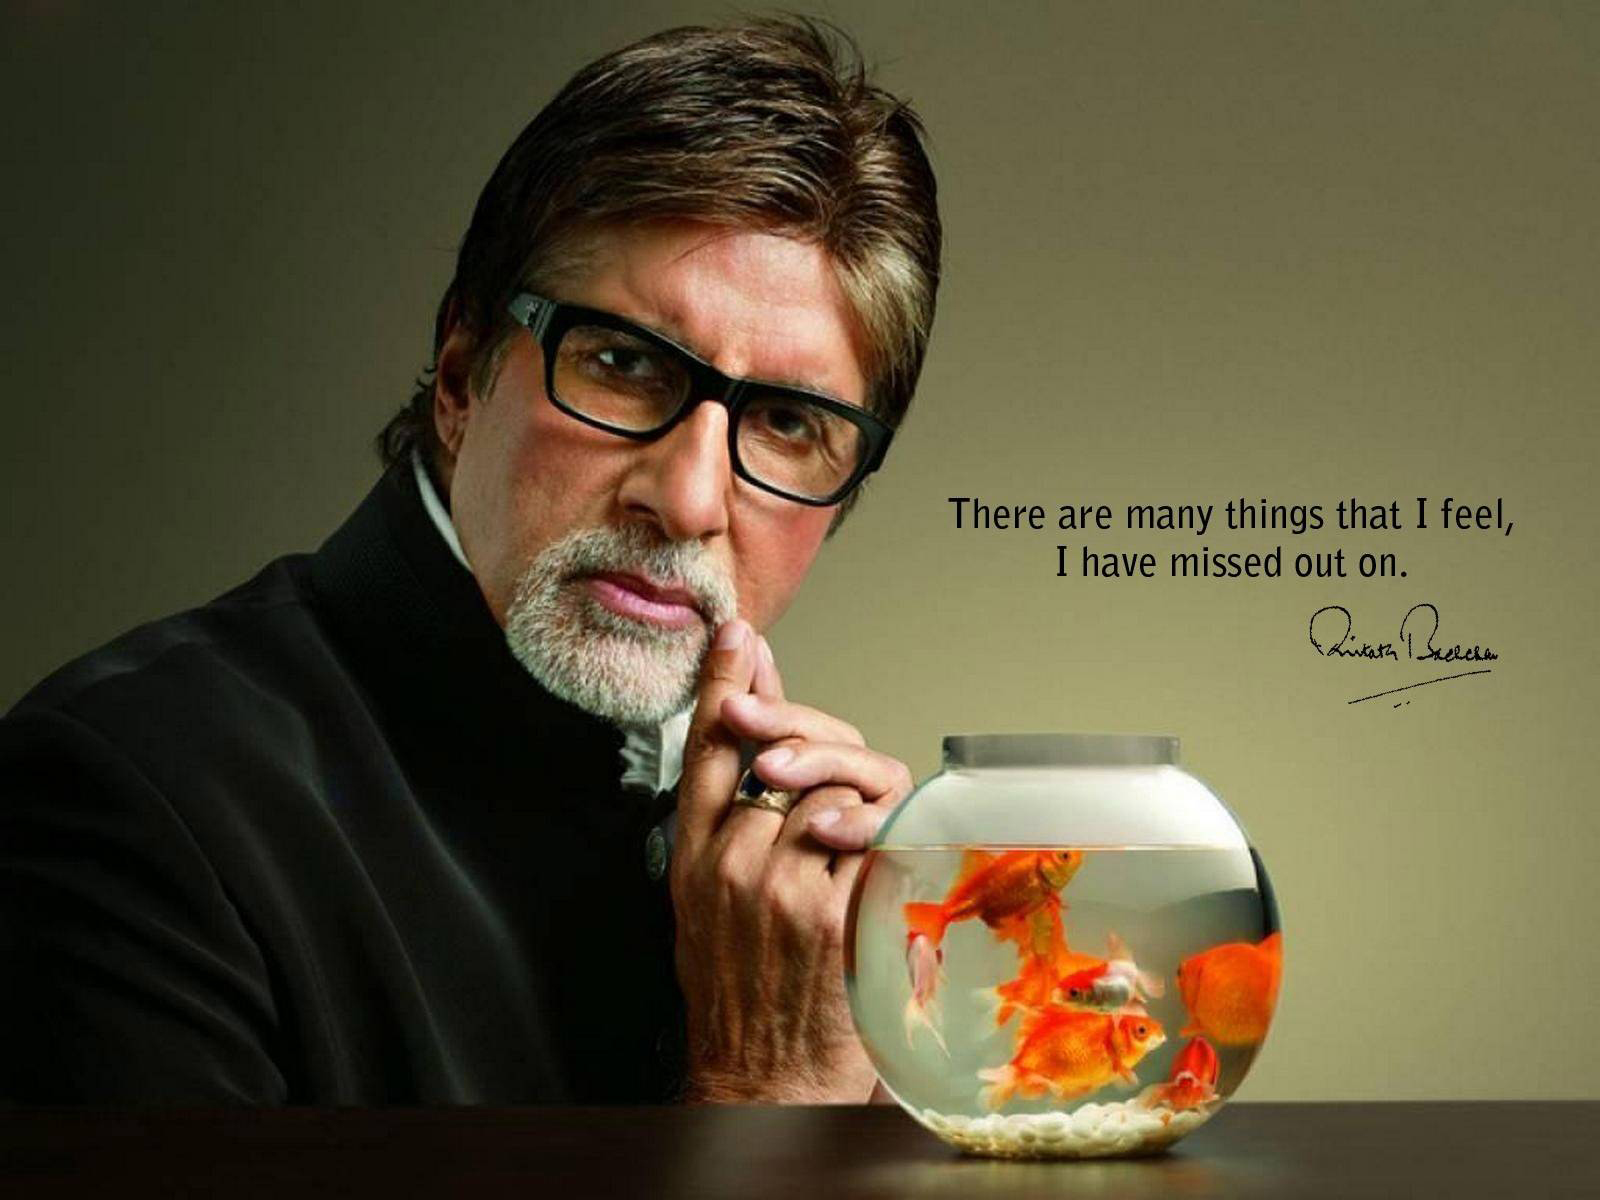 Amitabh Bachchan's quote #1